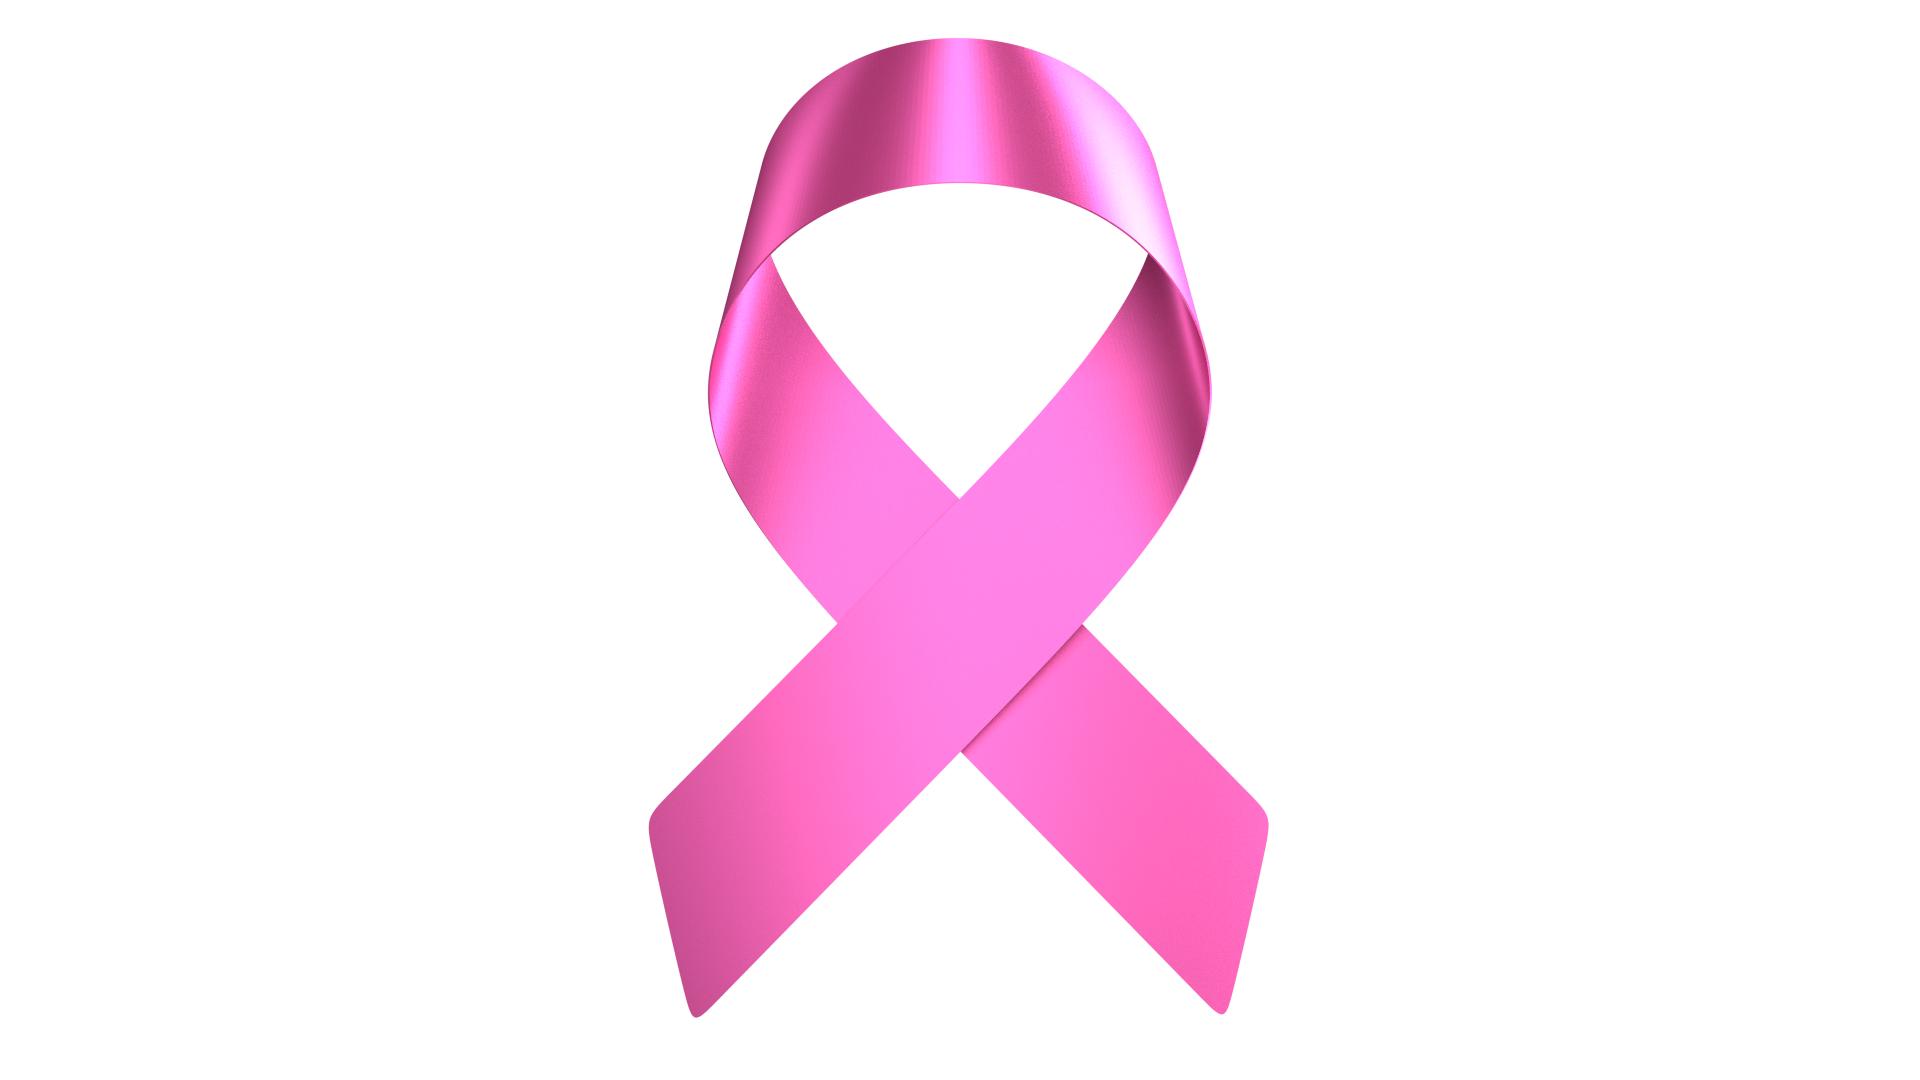 Breast Cancer Ribbon High Quality PNG